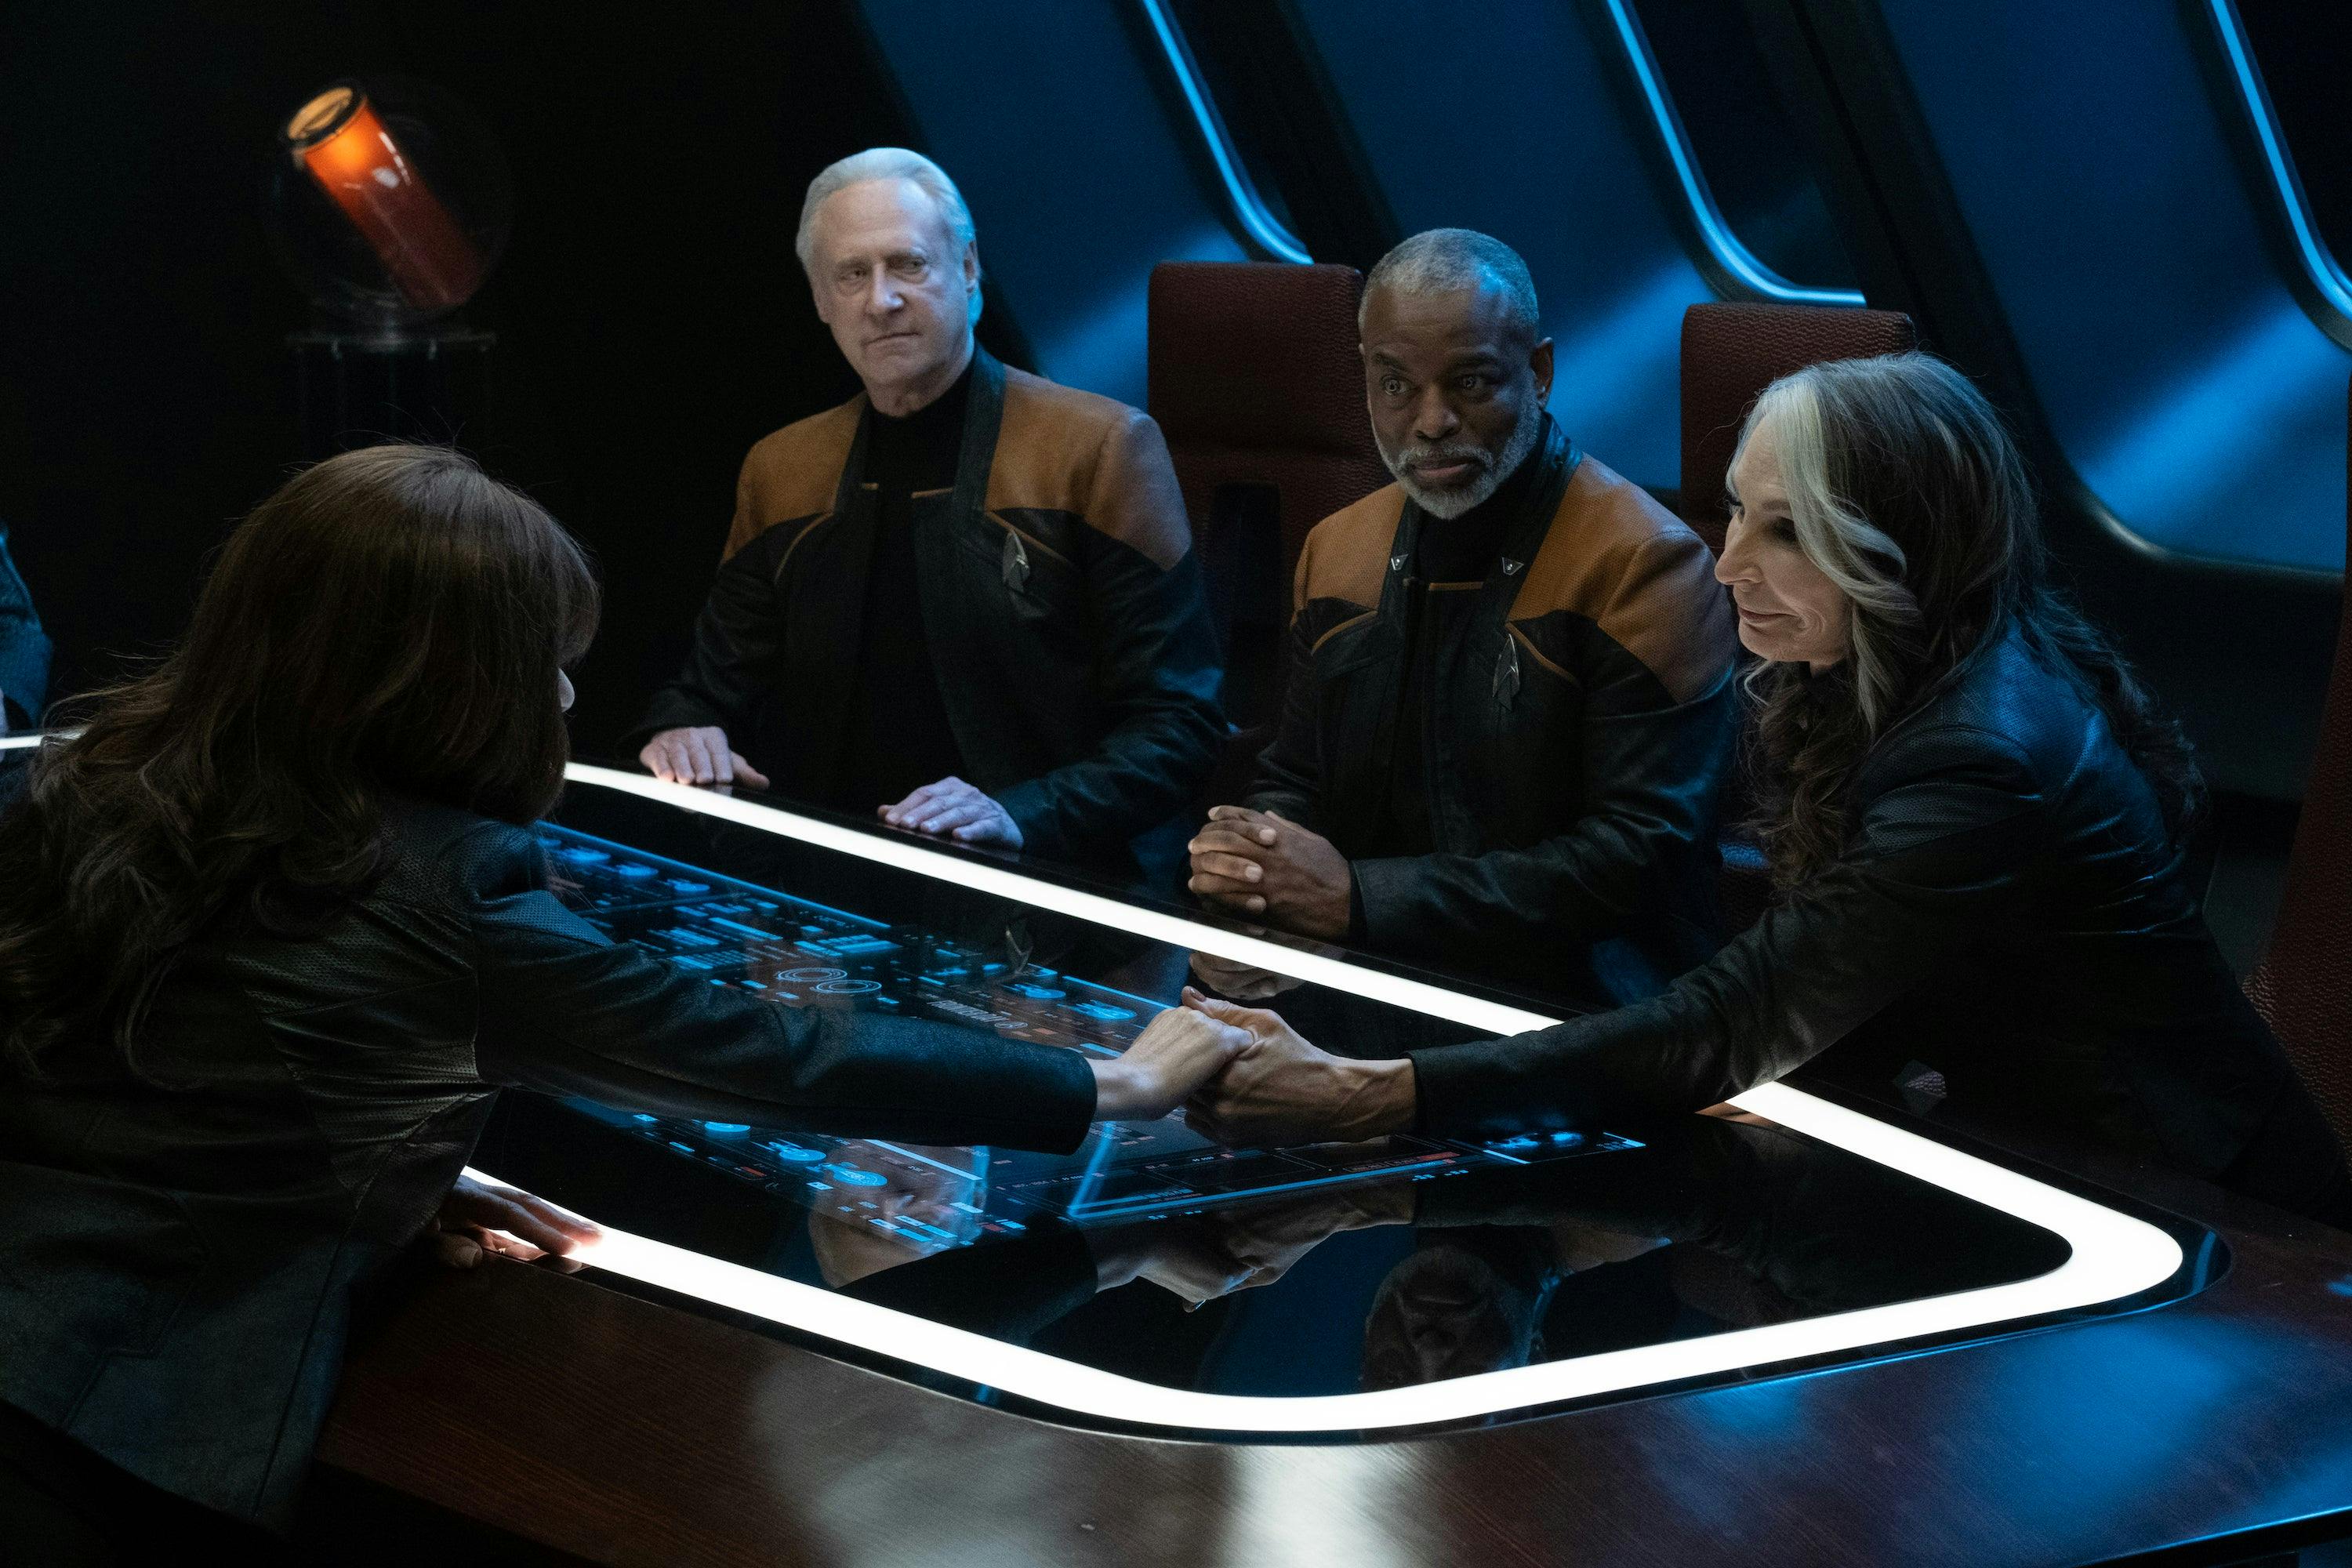 In the Titan's Observation Lounge, a seated Deanna Troi and Beverly Crusher reach across the table holding each other's hands as Data and Geordi La Forge observe